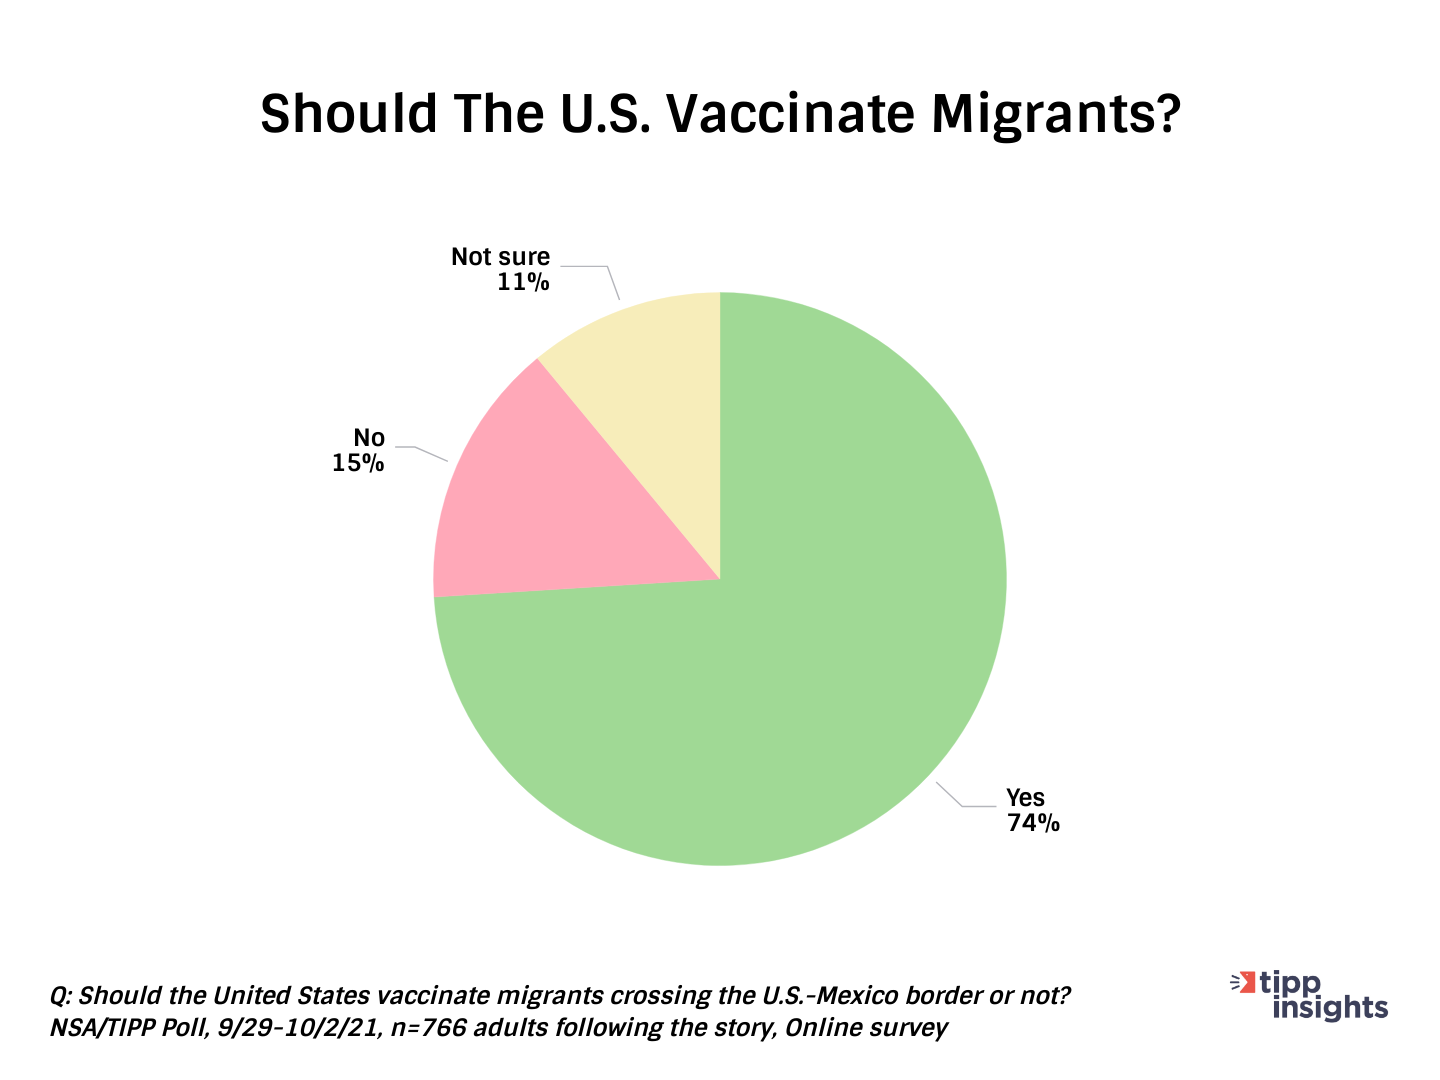 NSA/TIPP Poll Results: Should the U.S.Vaccinate Migrants